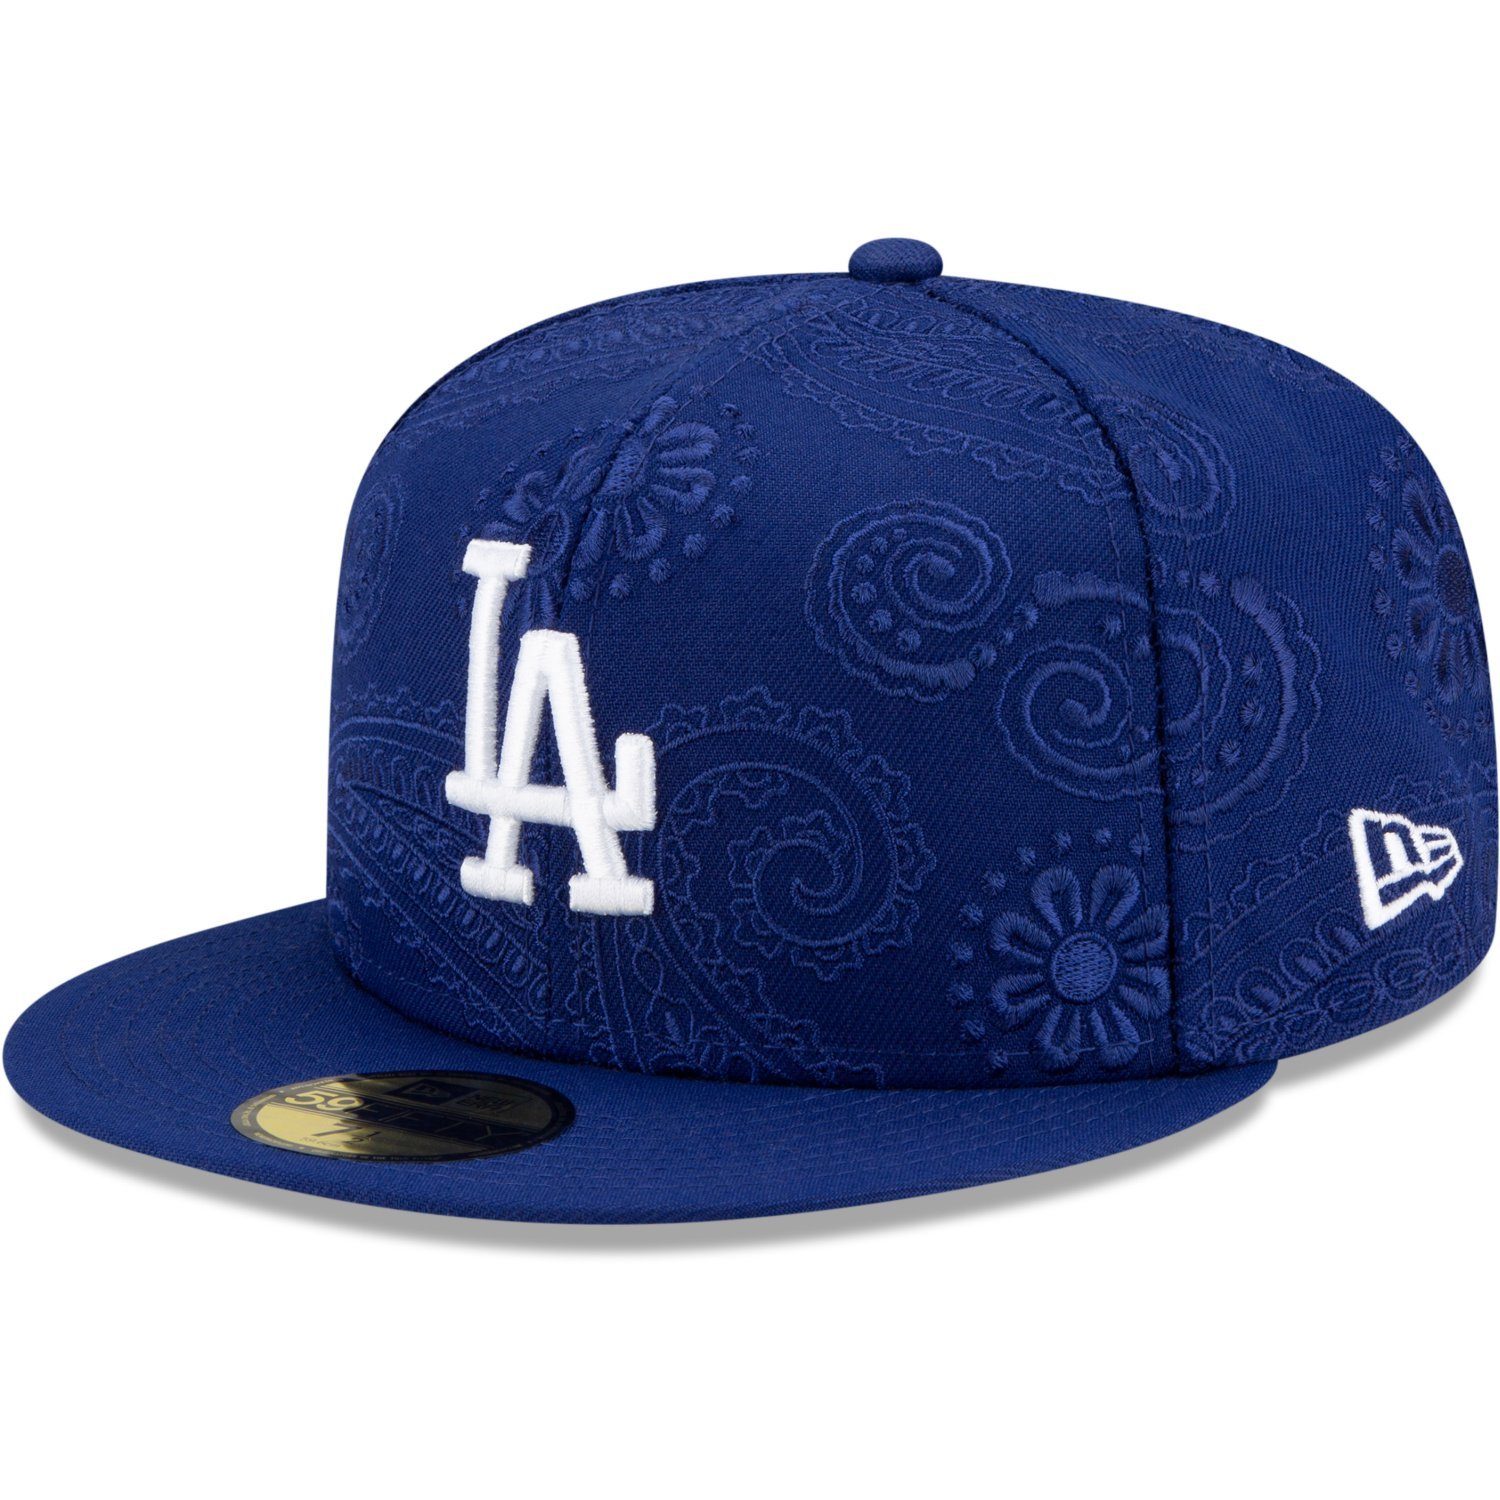 New Era Fitted Cap 59Fifty SWIRL PAISLEY Los Angeles Dodgers